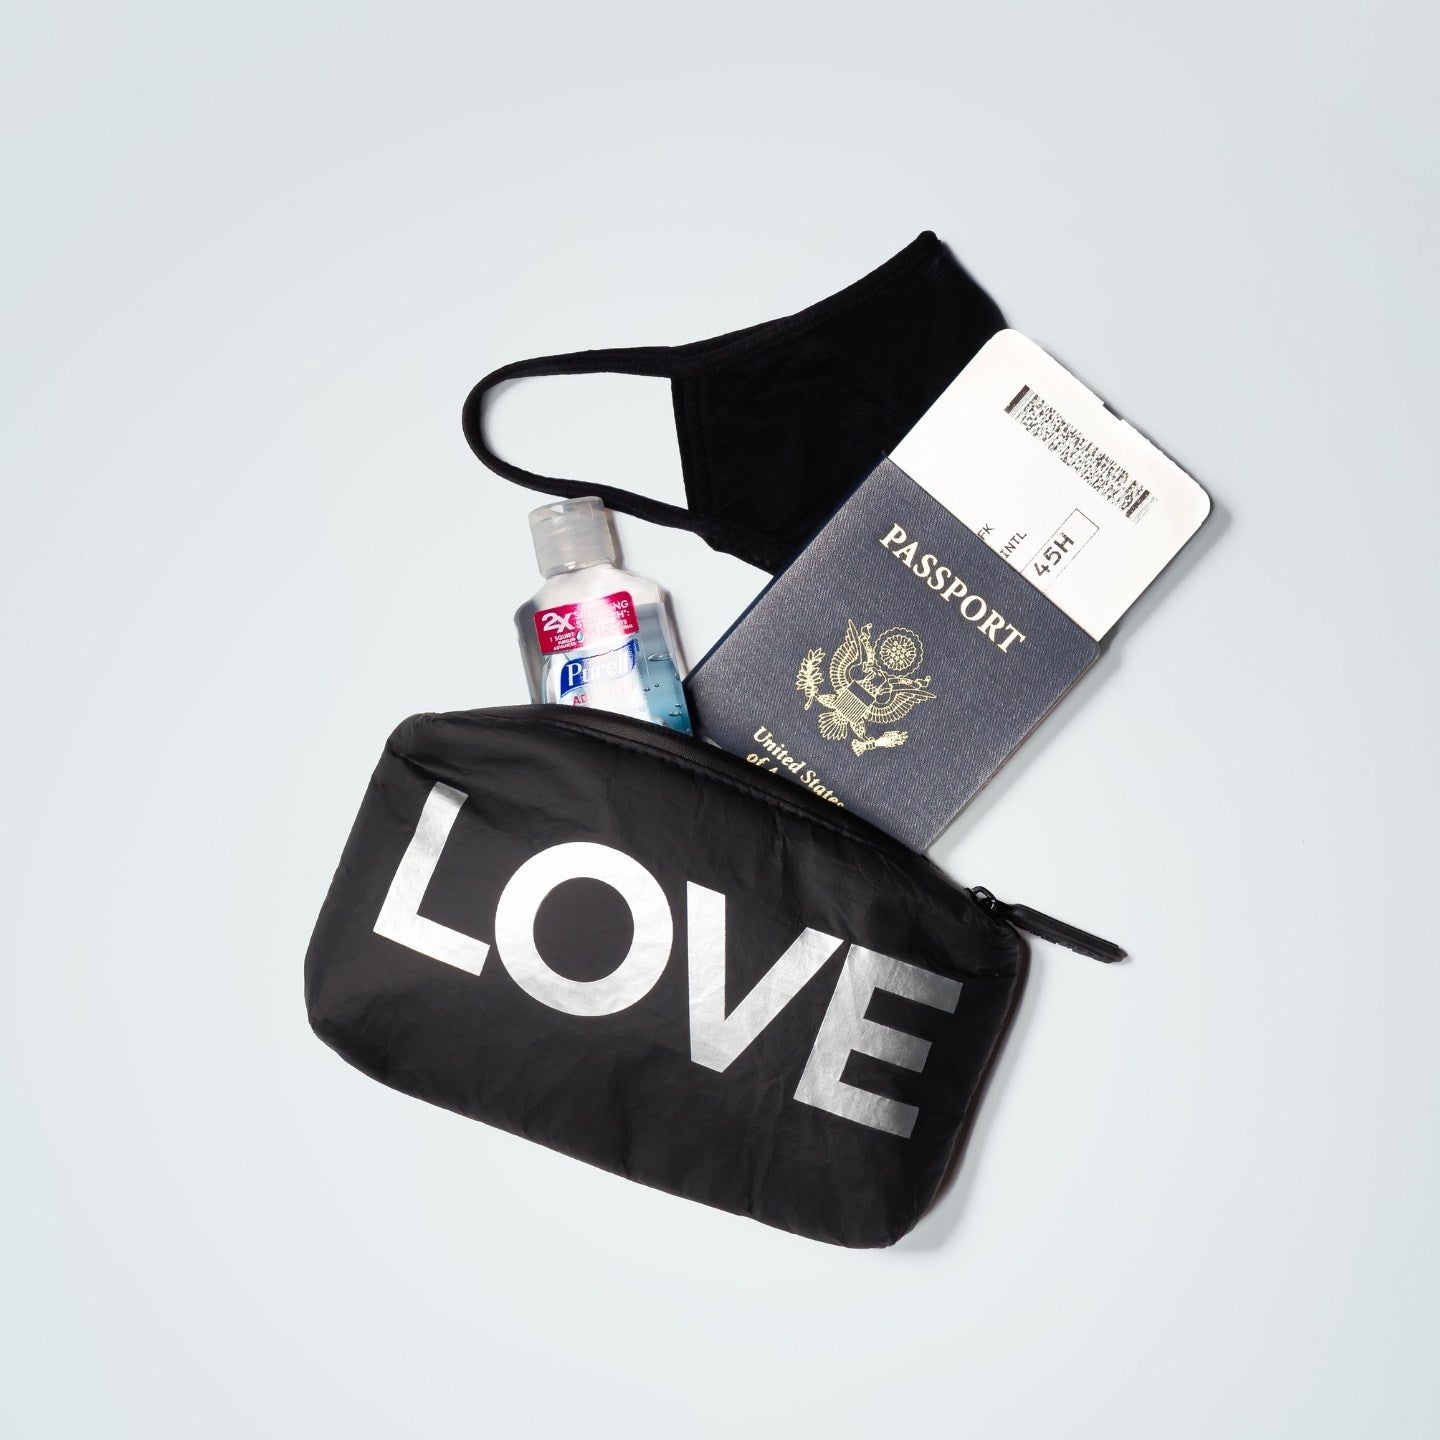 Set of Two - Organizational Packs - Black with Silver "LOVE"